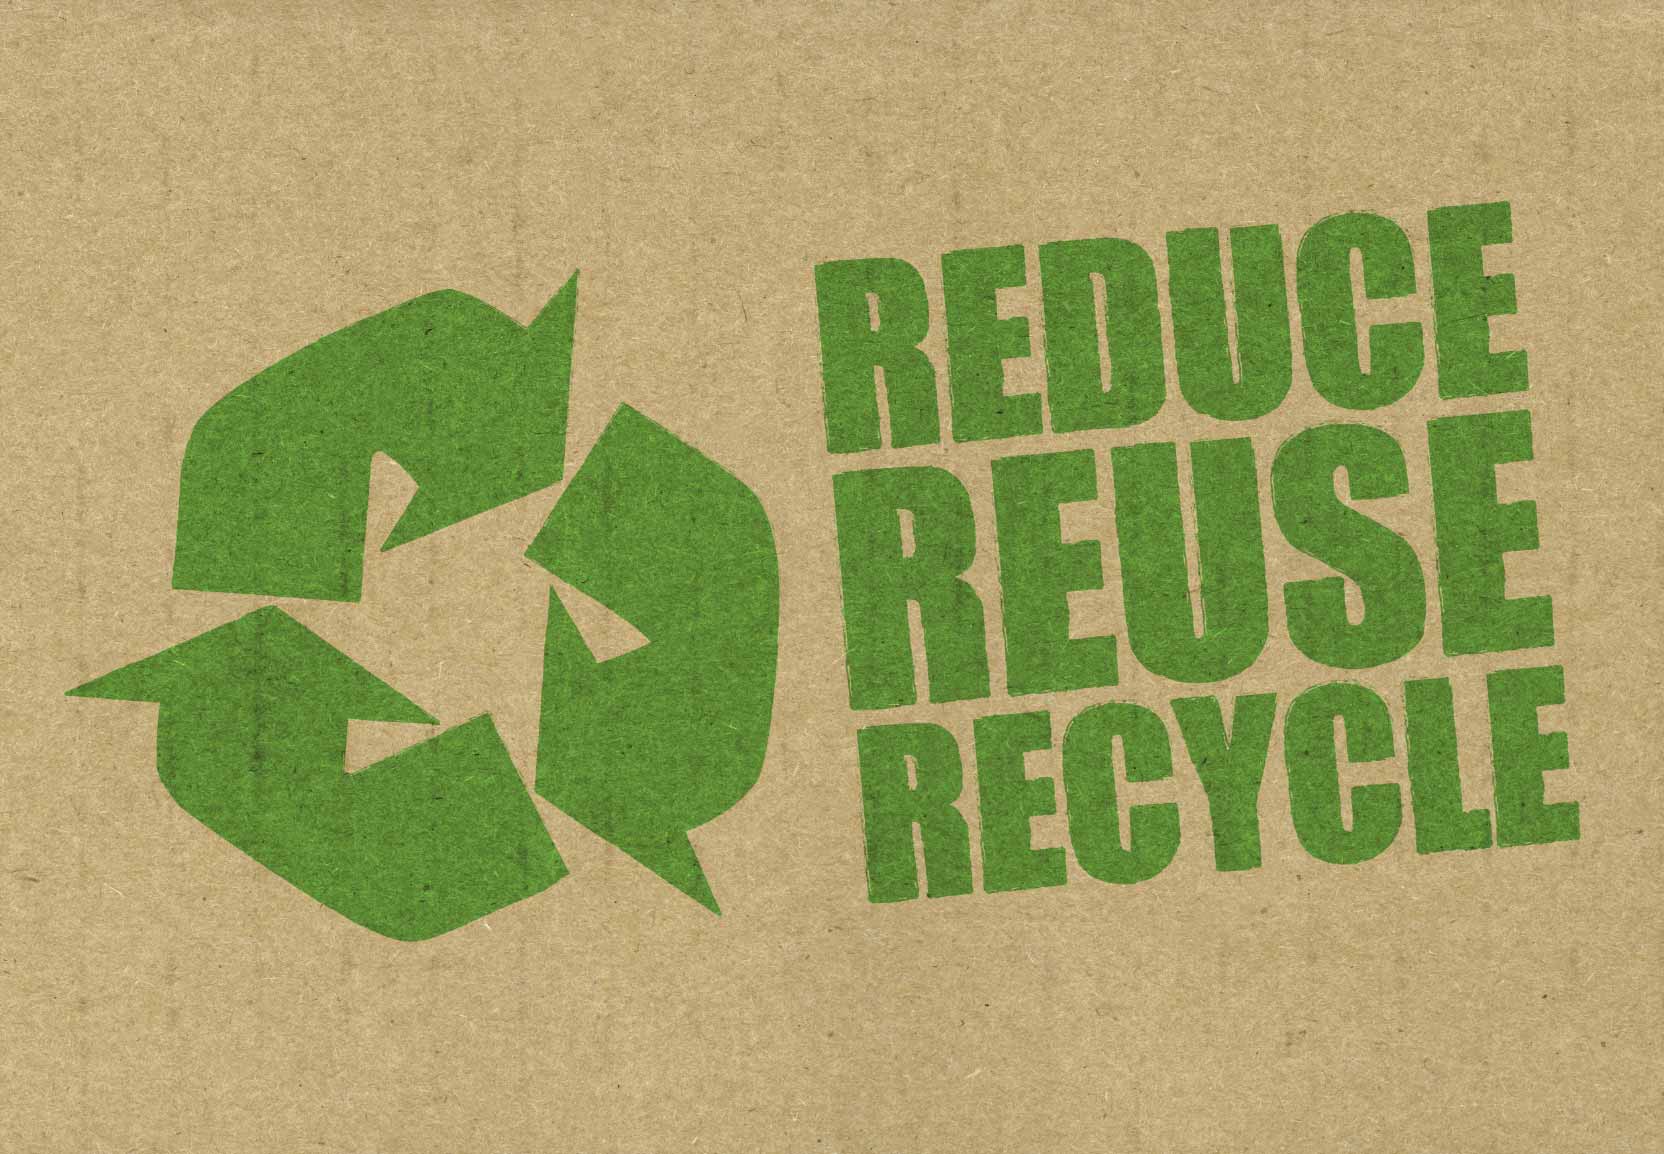 December 05, 2014 Guide to Reducing Waste